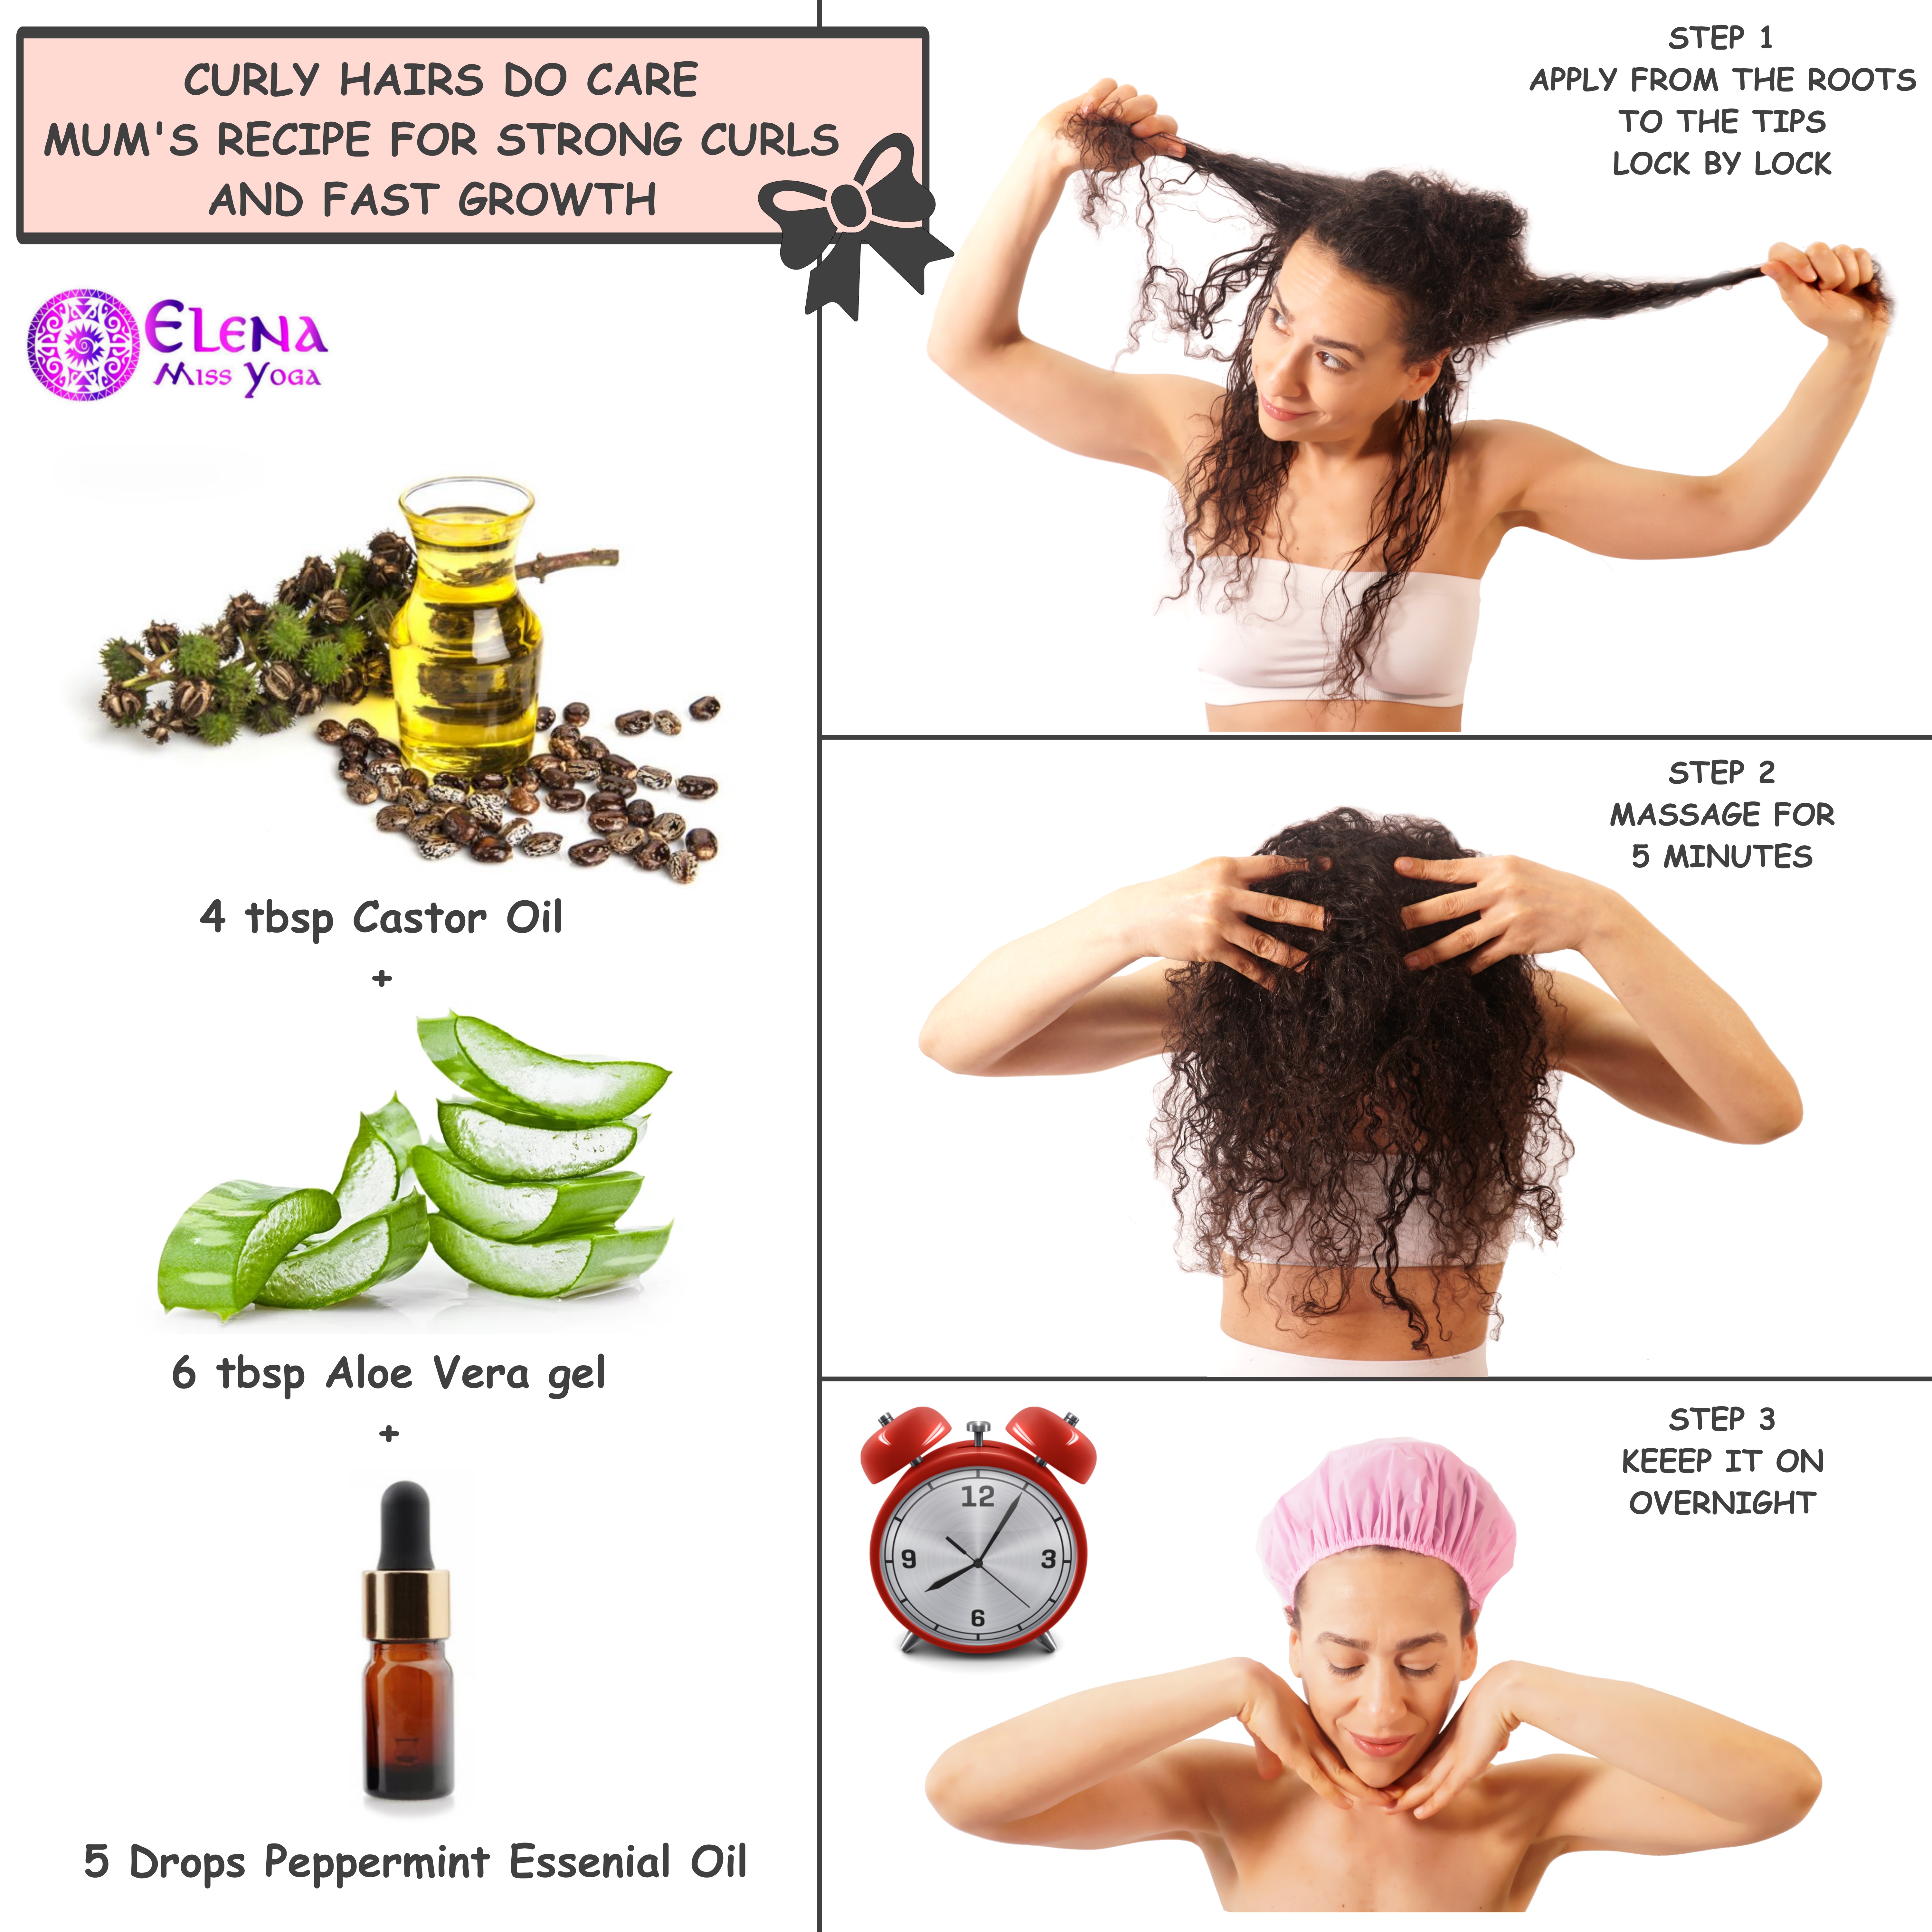 CASTOR OIL HAIR MASK - MUM'S RECIPE FOR STRONG CURLS AND FAST GROWTH